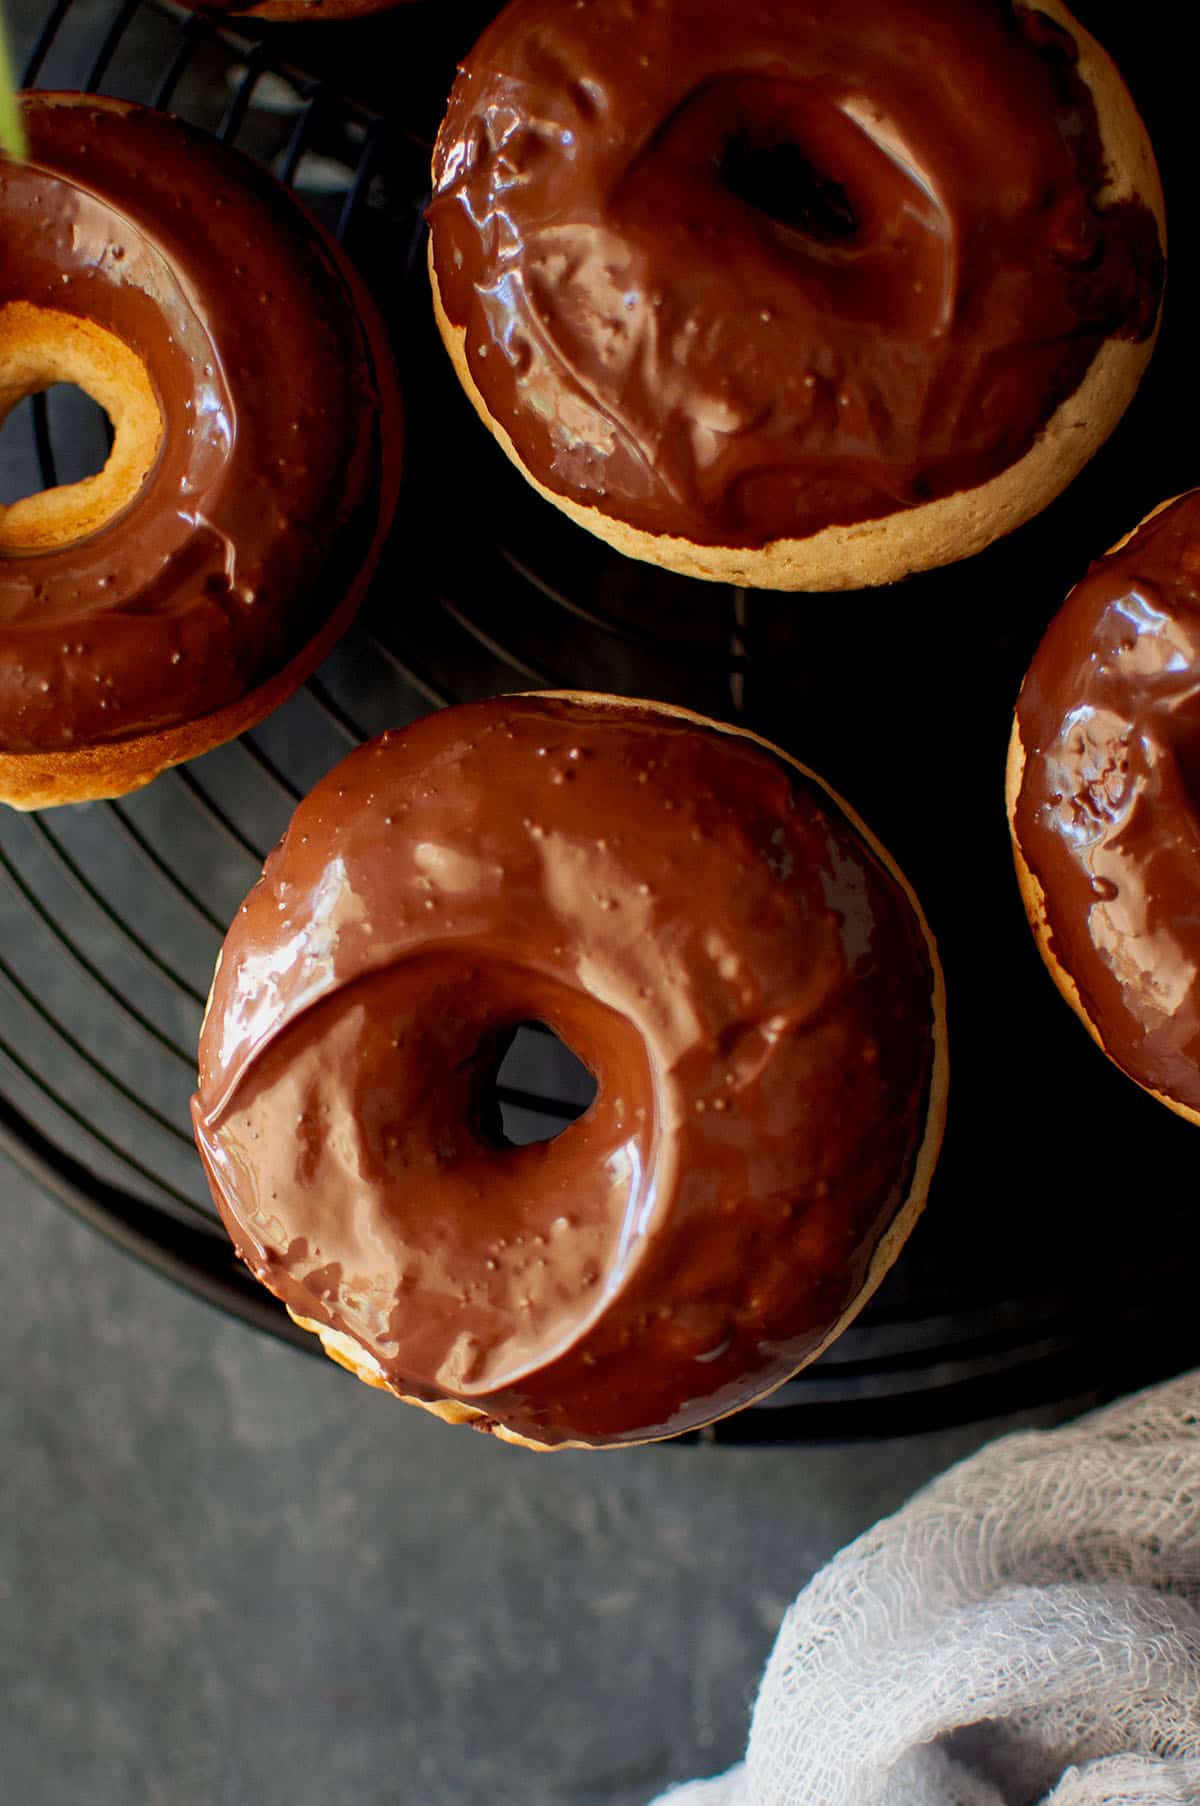 Top view of chocolate glazed donuts.